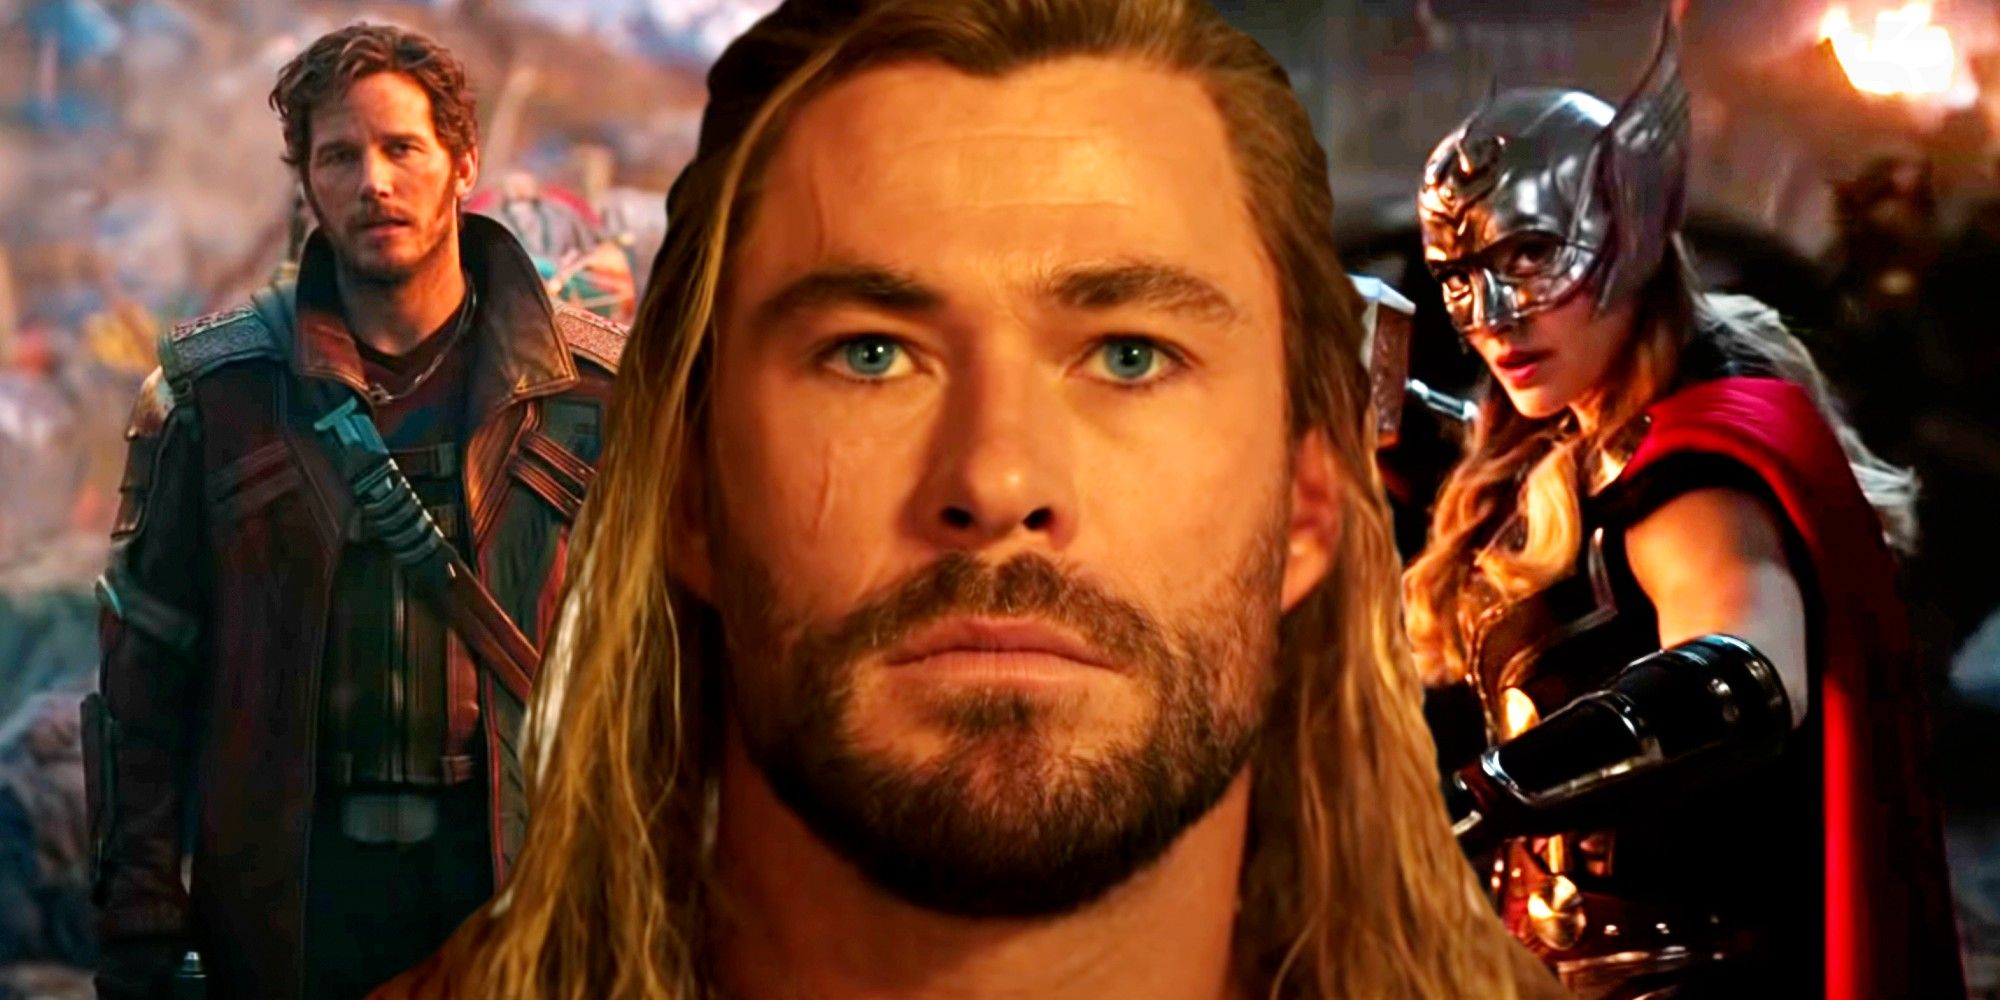 Why 'Thor: Love and Thunder' Fell Flat When 'Ragnarok' Thrived Continues to  Puzzle